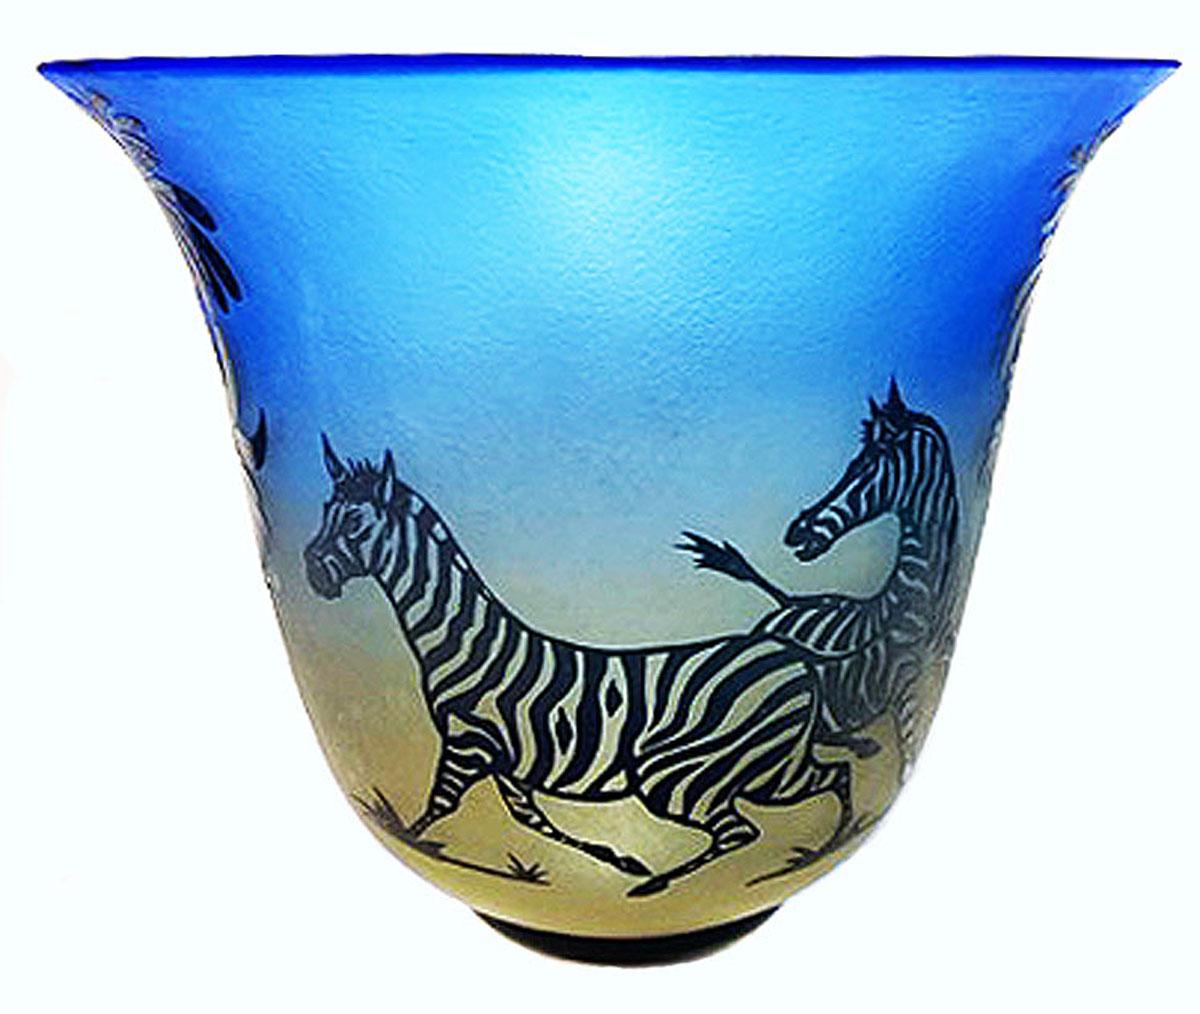 American Craftsman Overlay Cameo etched Vessel with Zebra- Number 10 of 50(Limited Series)